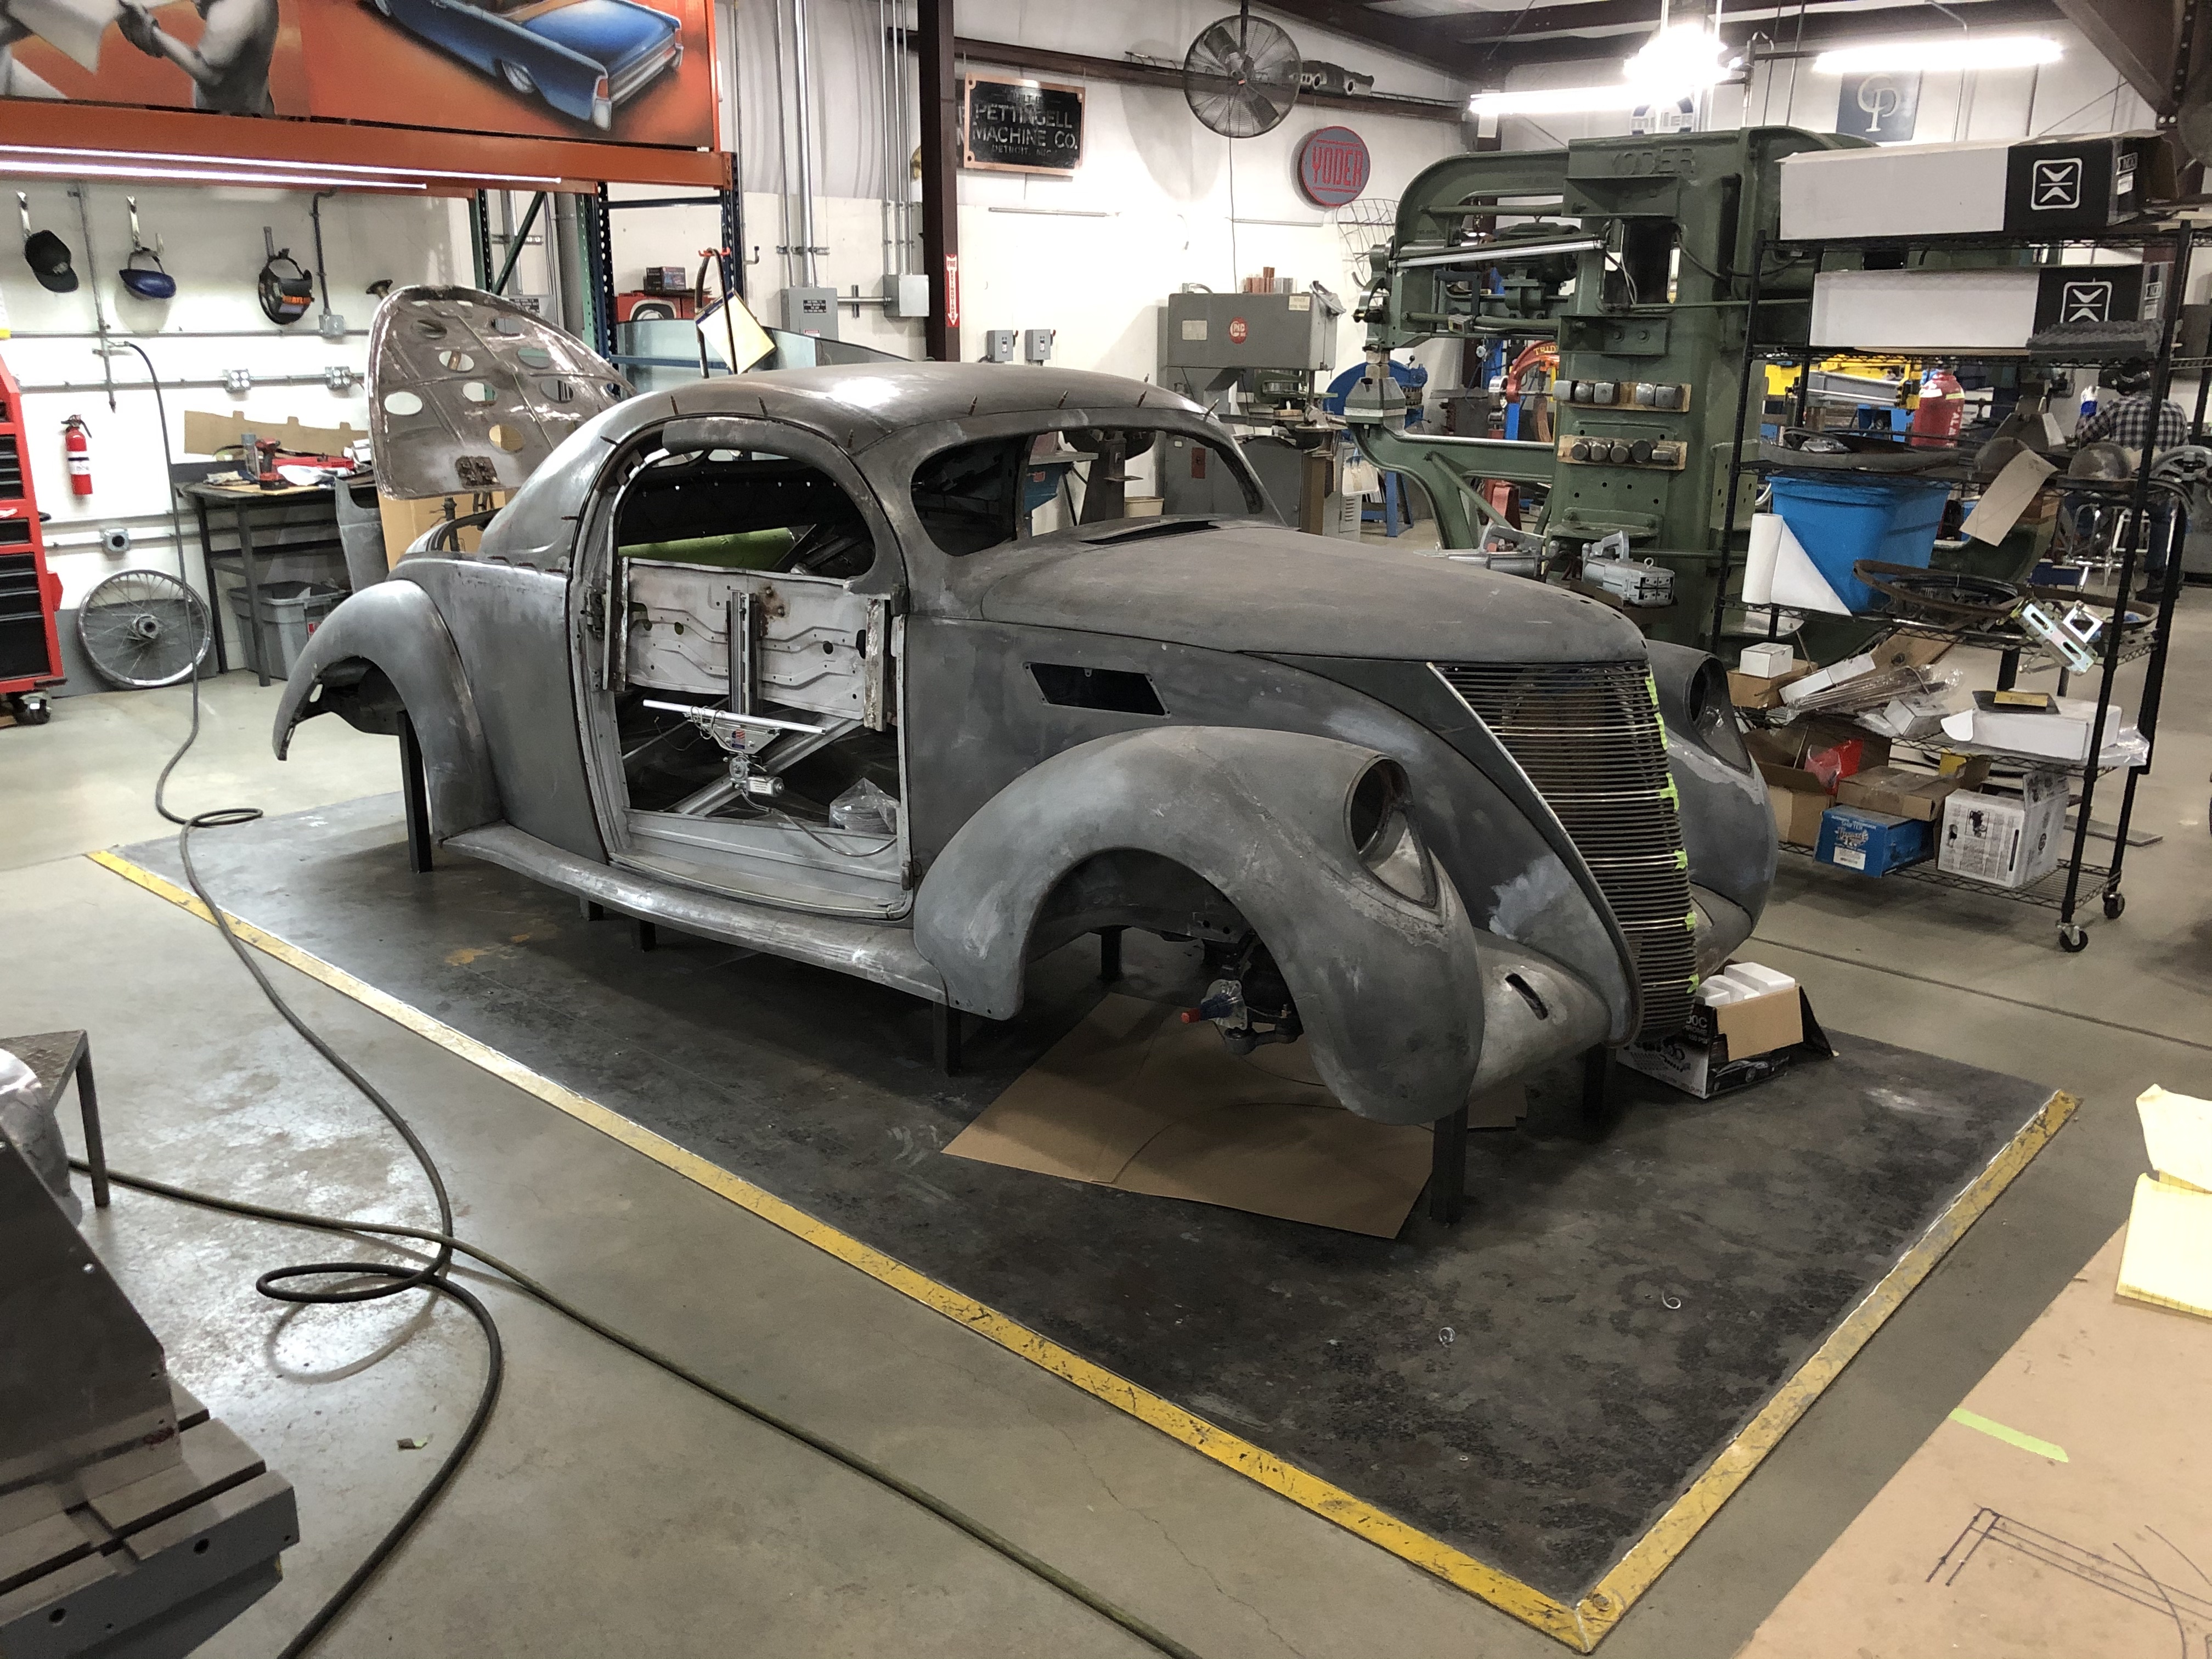 1937 Zephyr Coupe before metal forming work